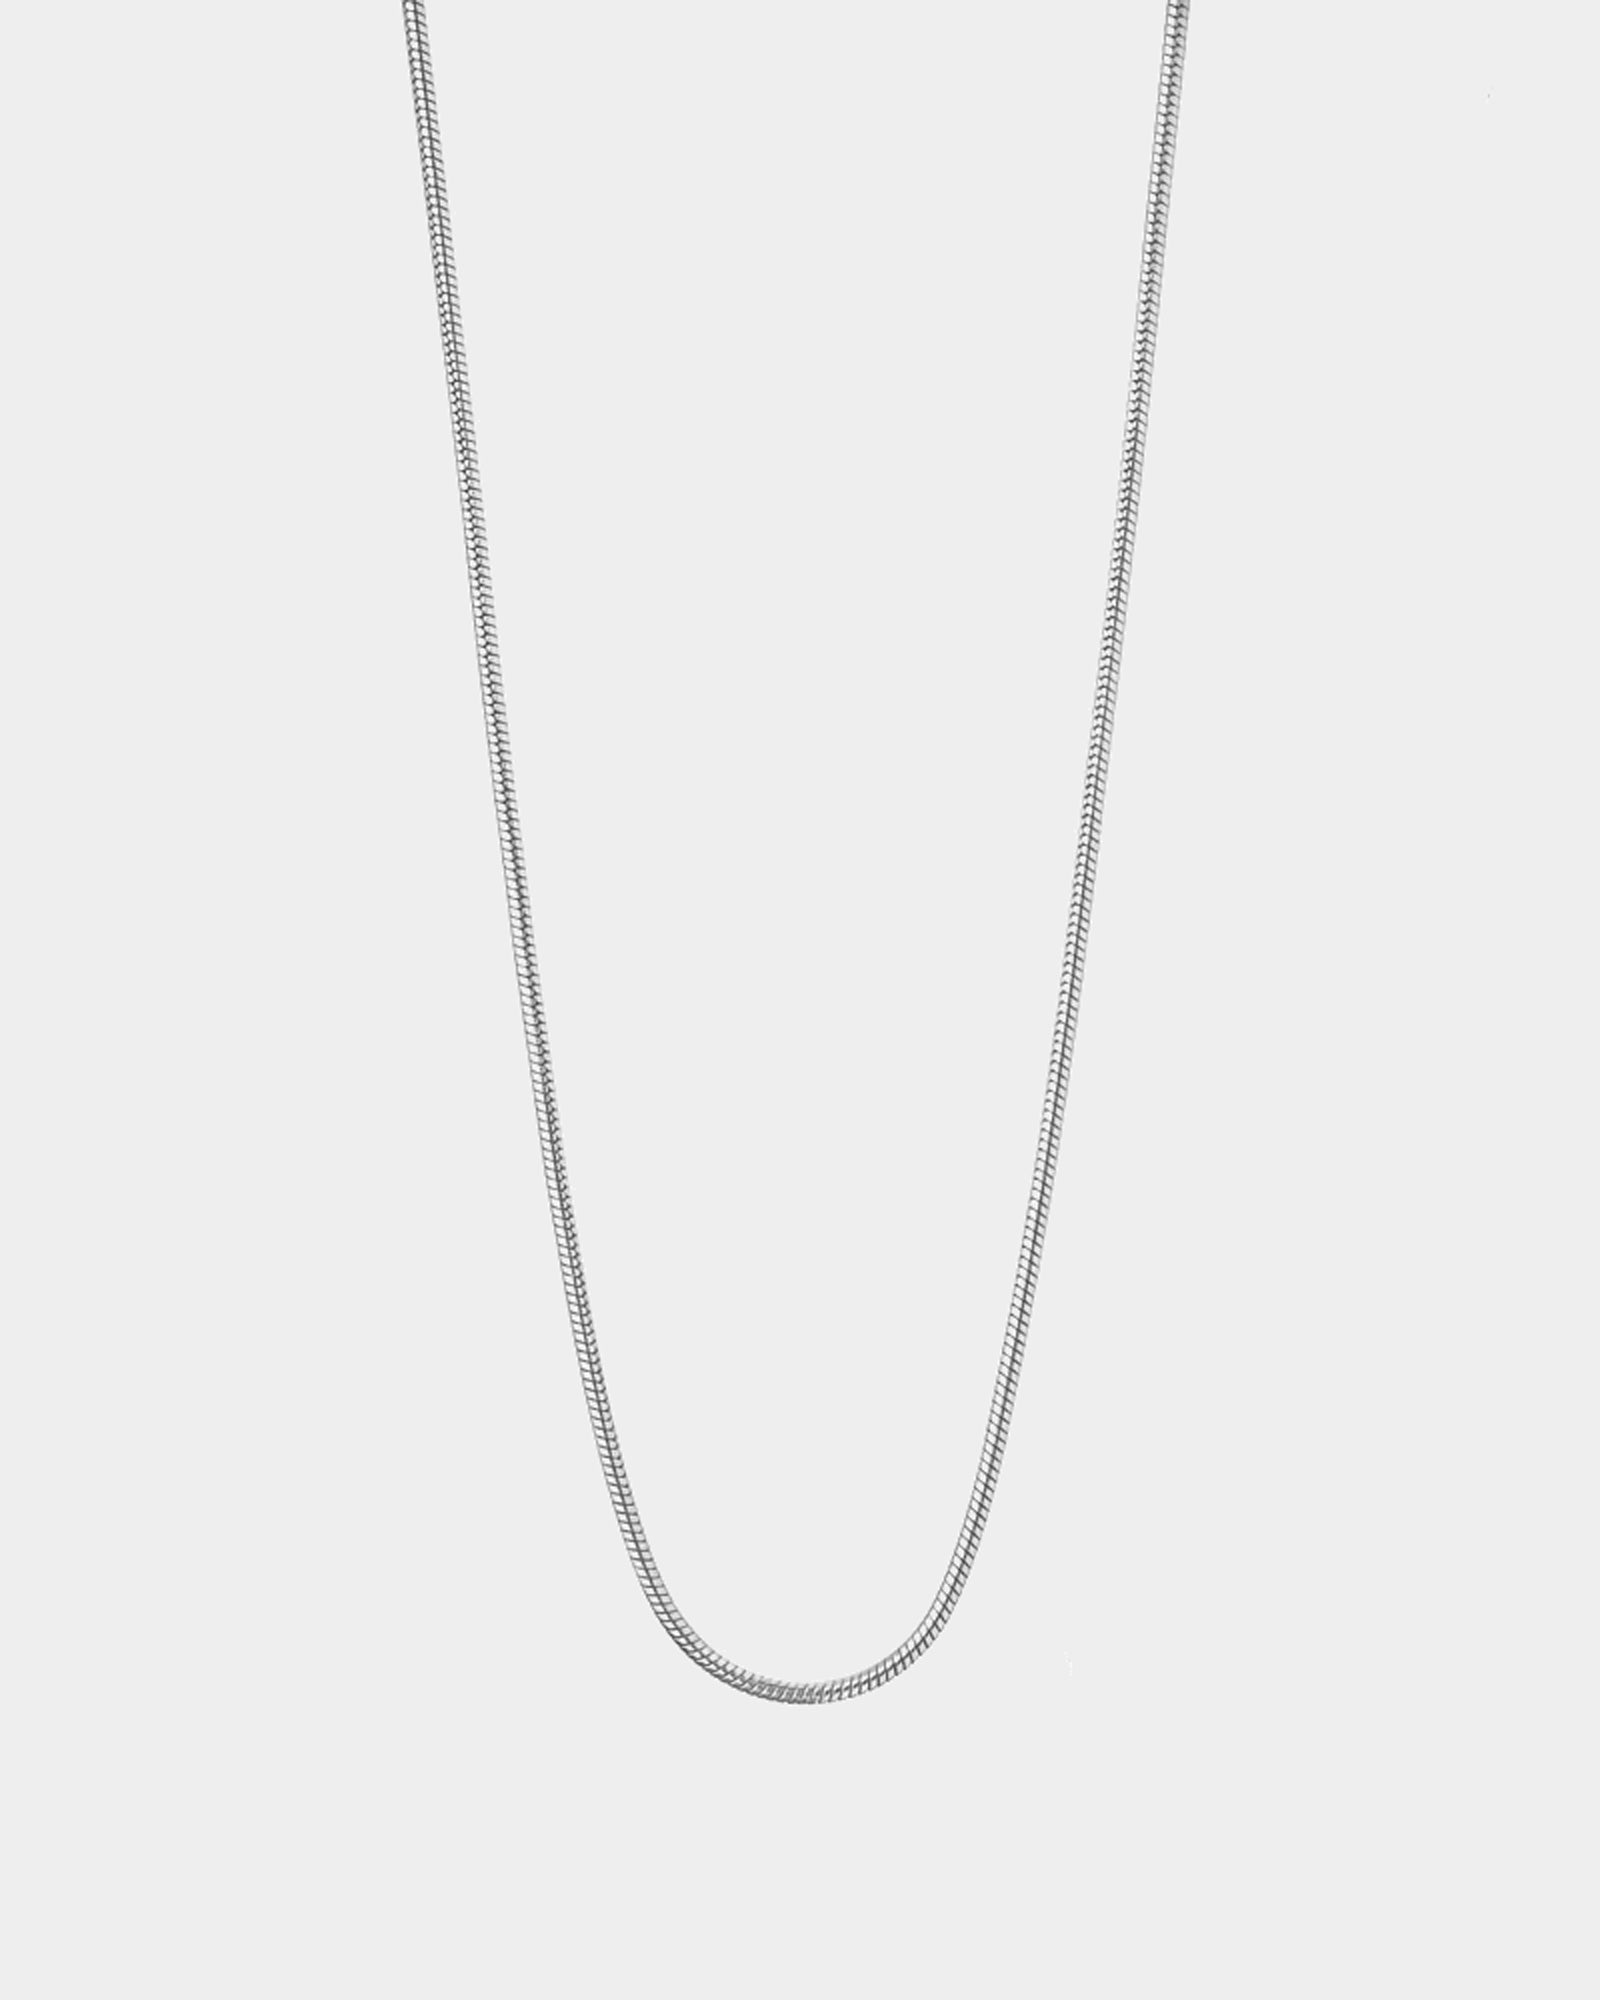 Snake Chain Necklace - 925 Sterling Silver Necklaces - Online unissex jewelry - dicci